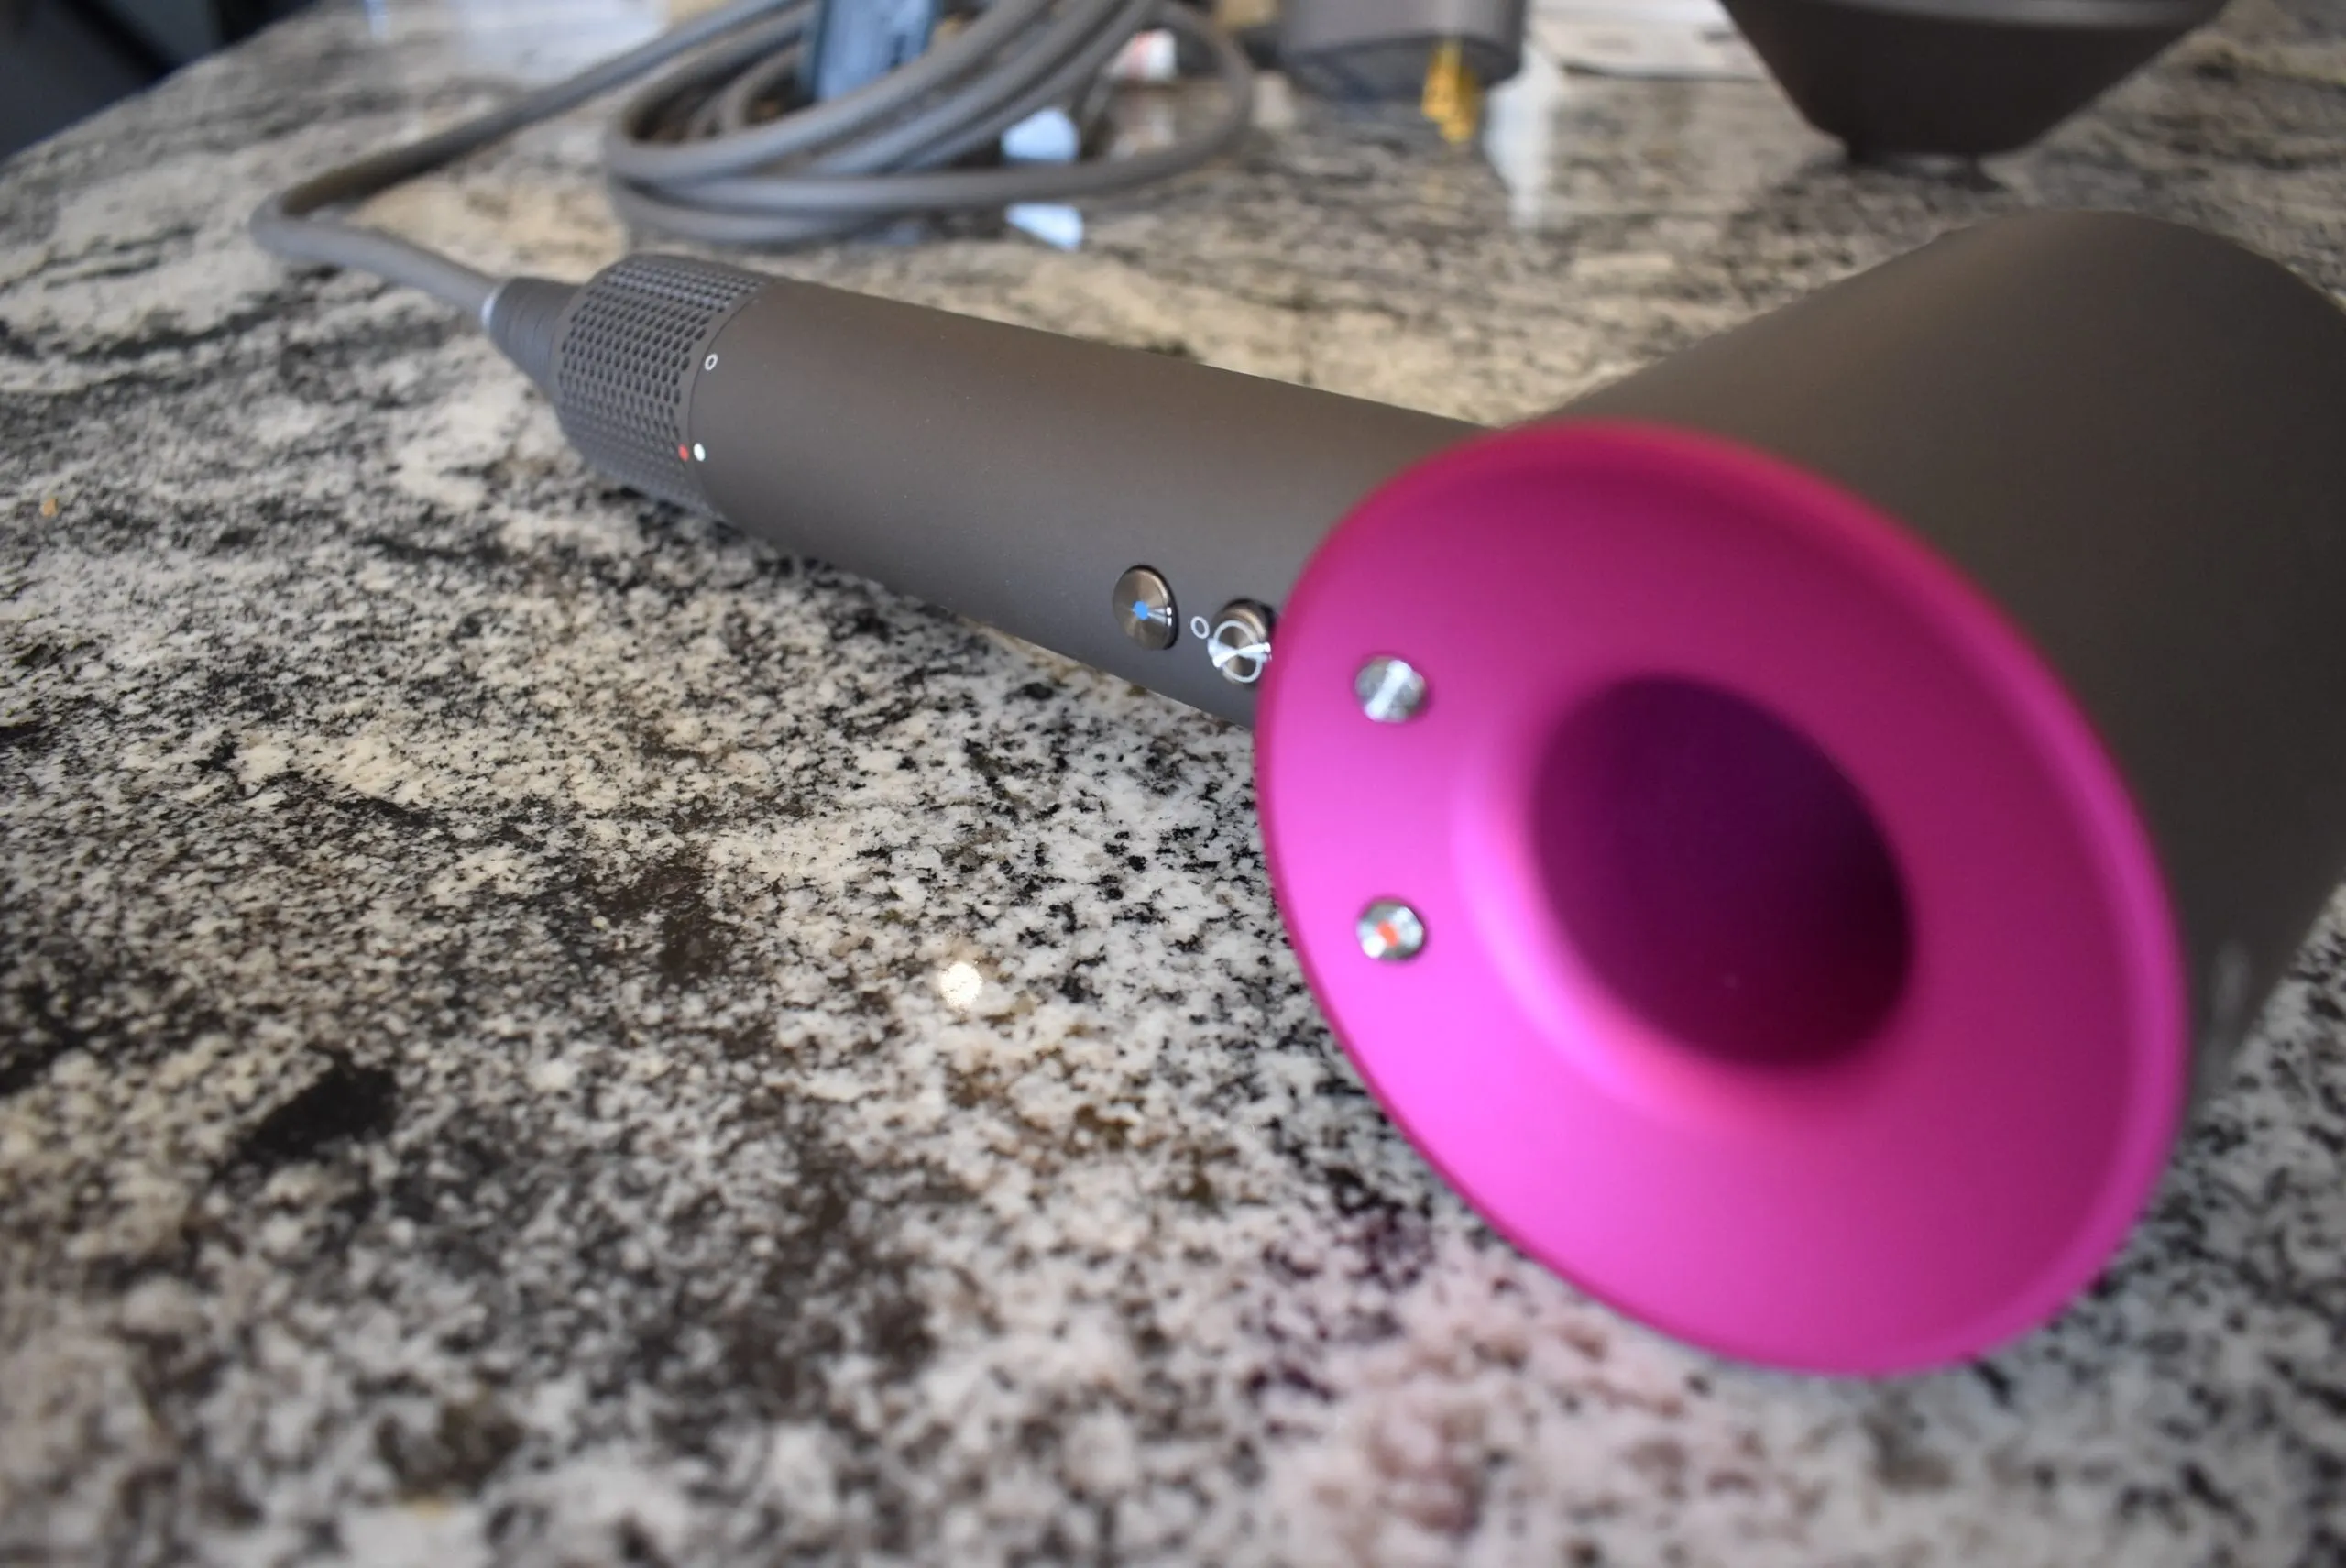 For a Dyson hair dryer review, the back and buttons of the unit